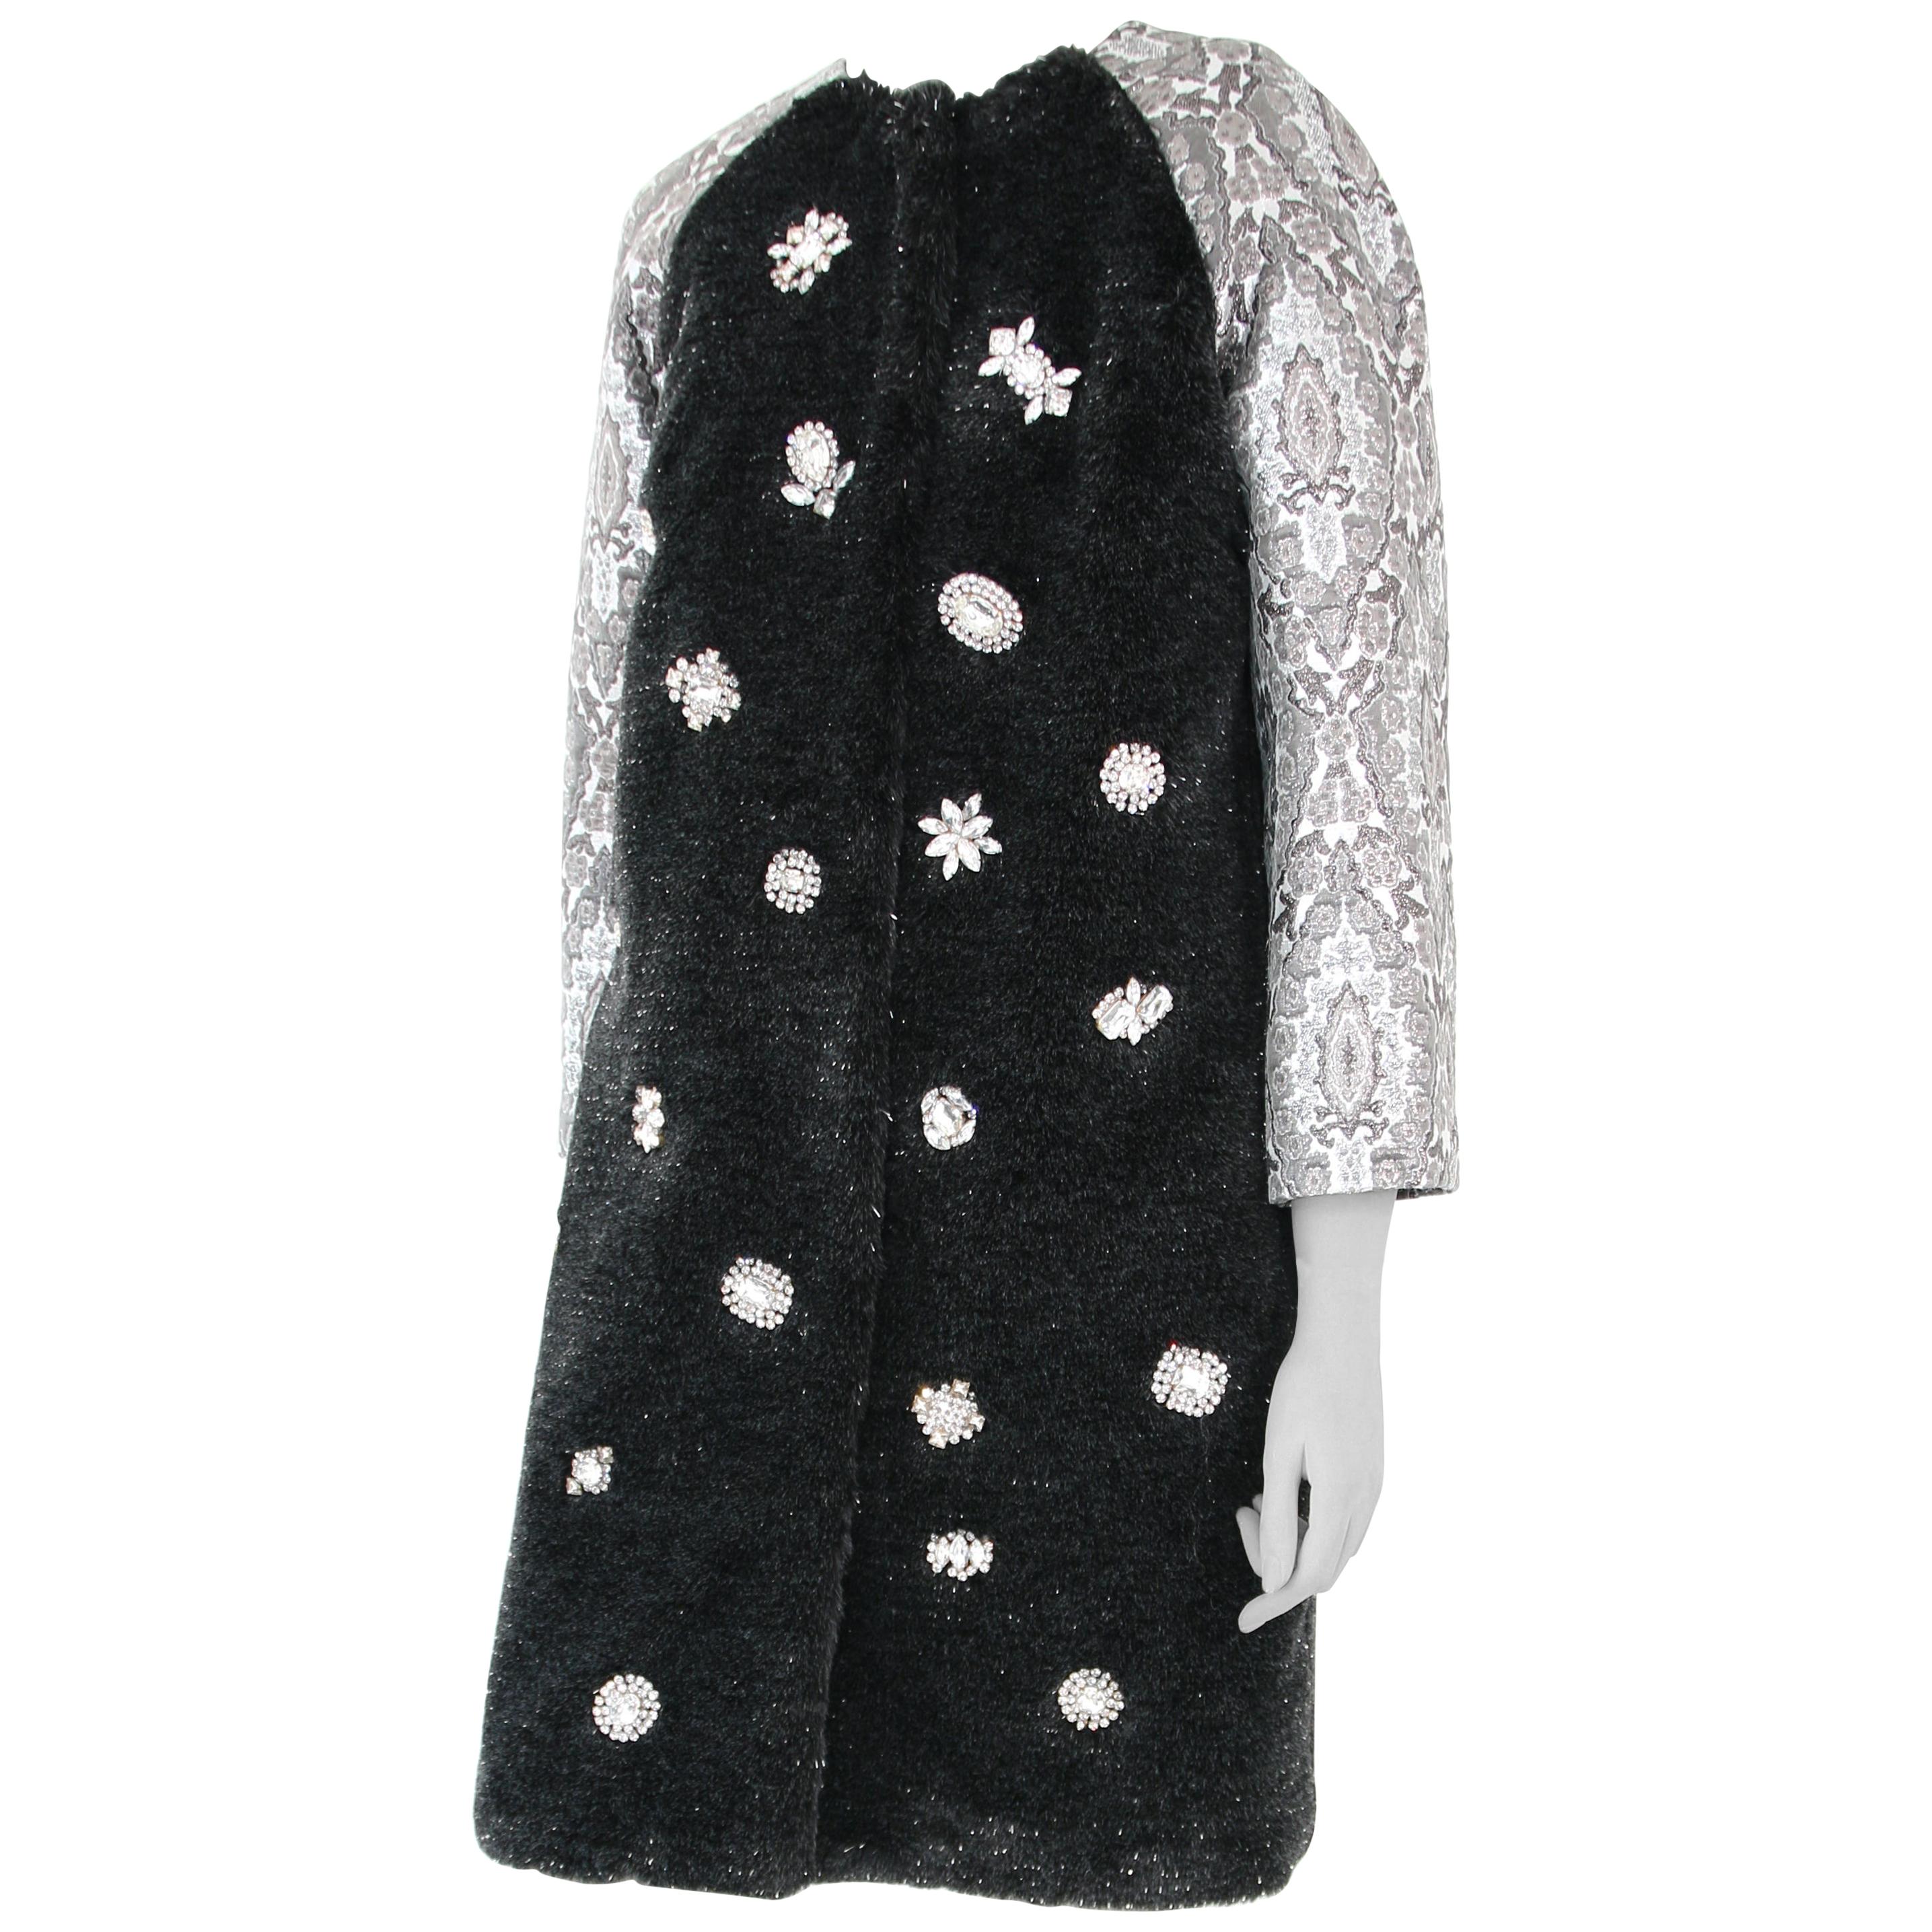 Pelush Black Faux Fur Mink Coat with Vintage Crystals and Damask Brocade - XS For Sale